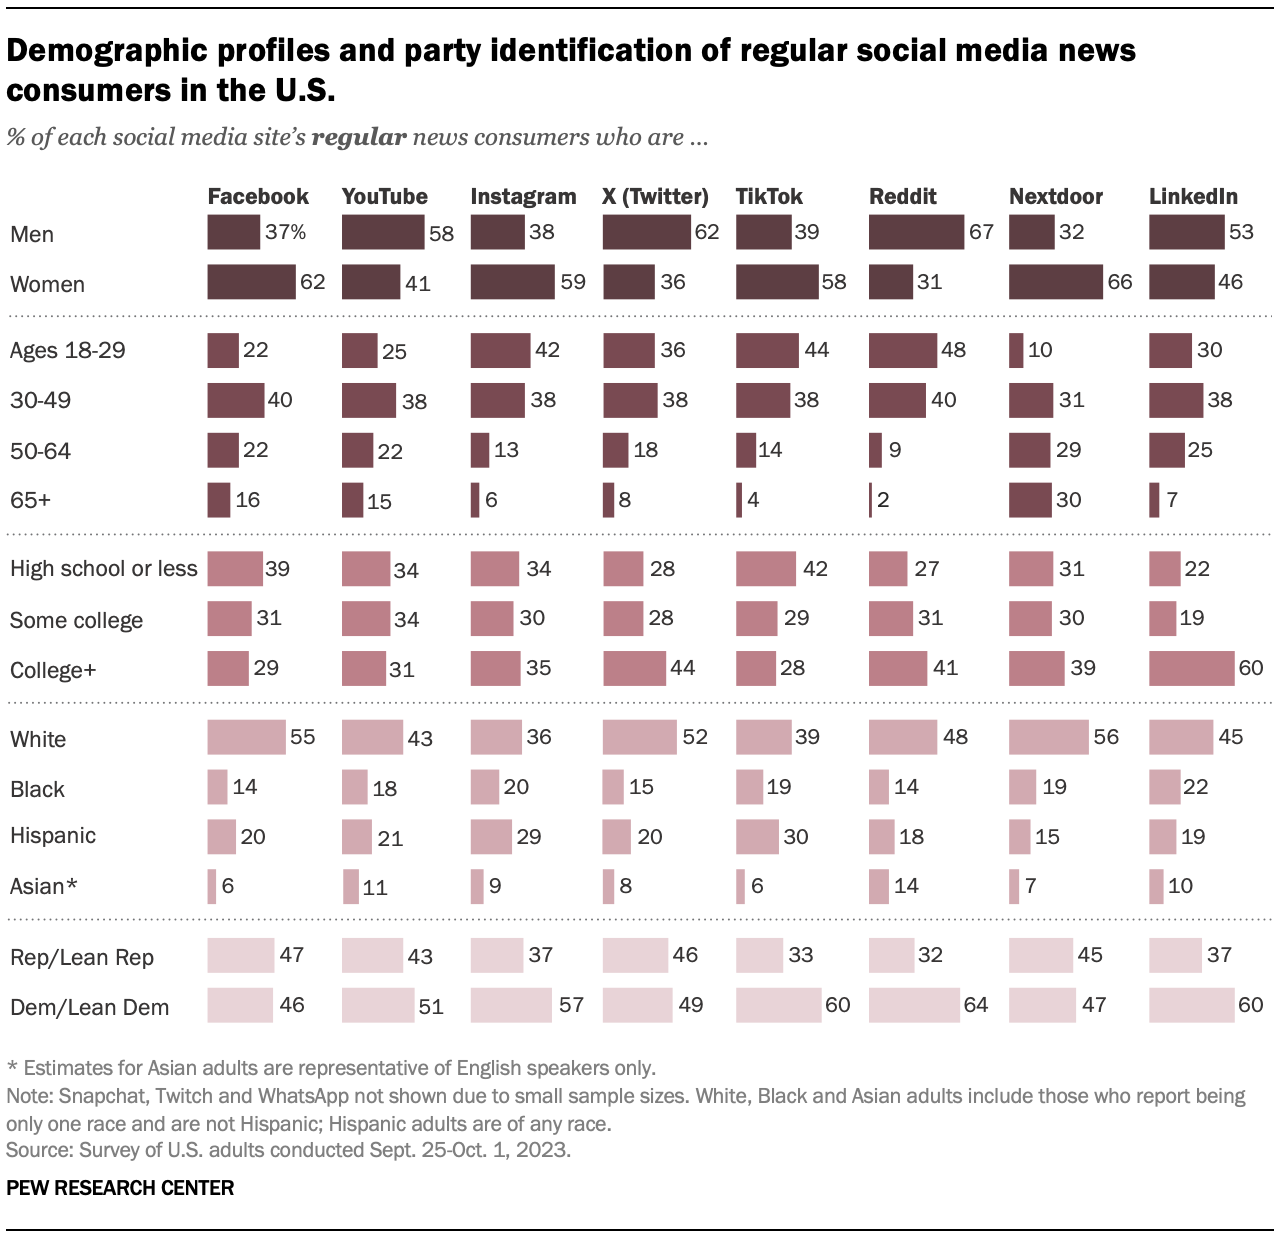 A series of bar charts showing Demographic profiles and party identification of regular social media news consumers in the U.S.